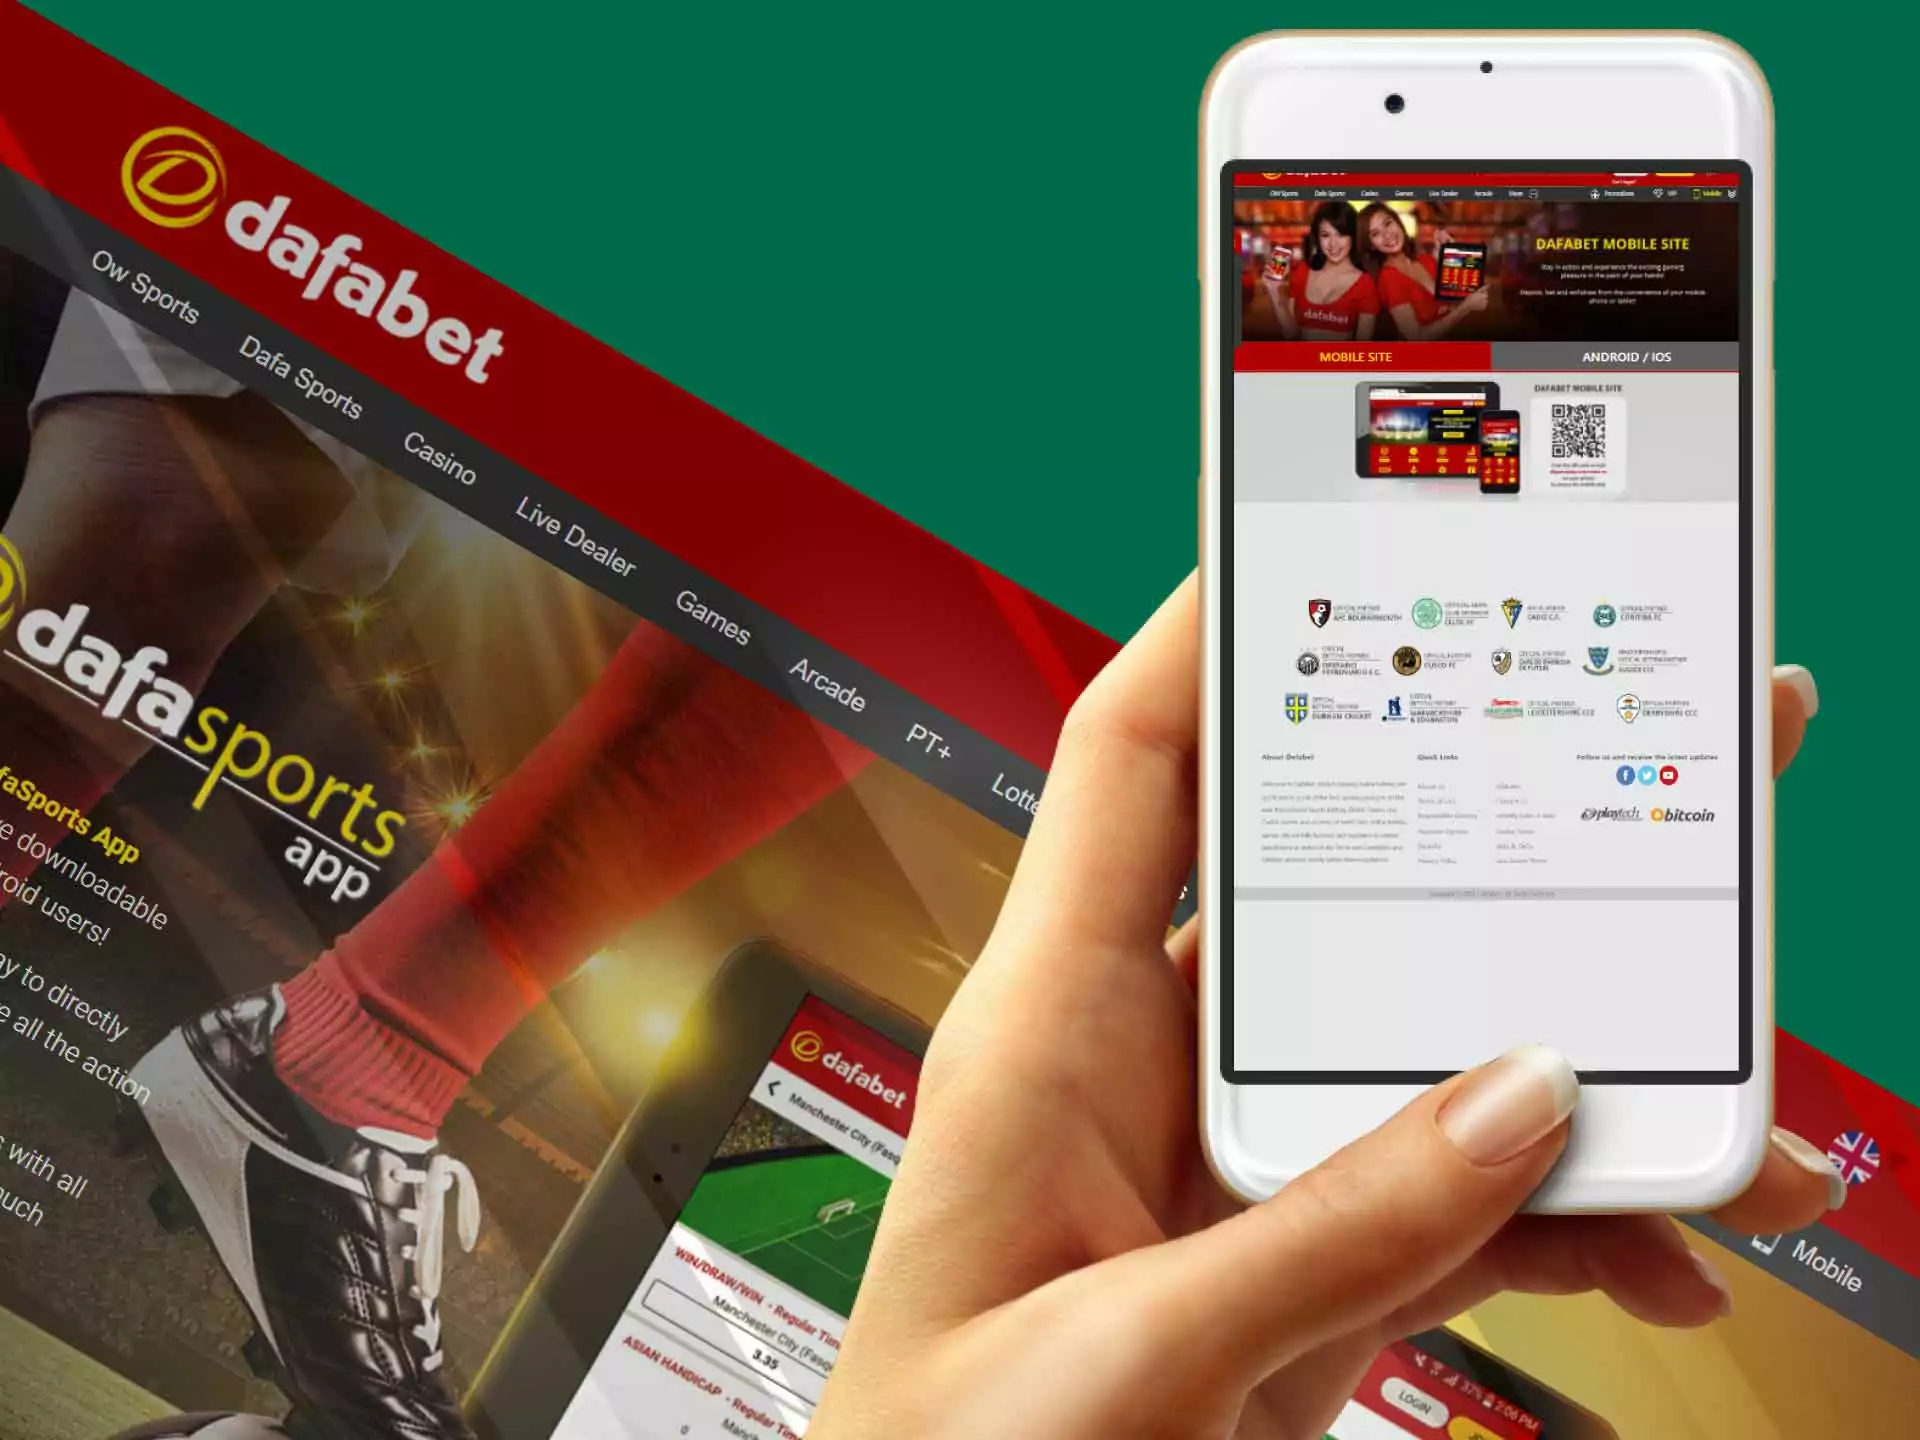 Go to the Dafabet official website, download and install the app on your smartphone.